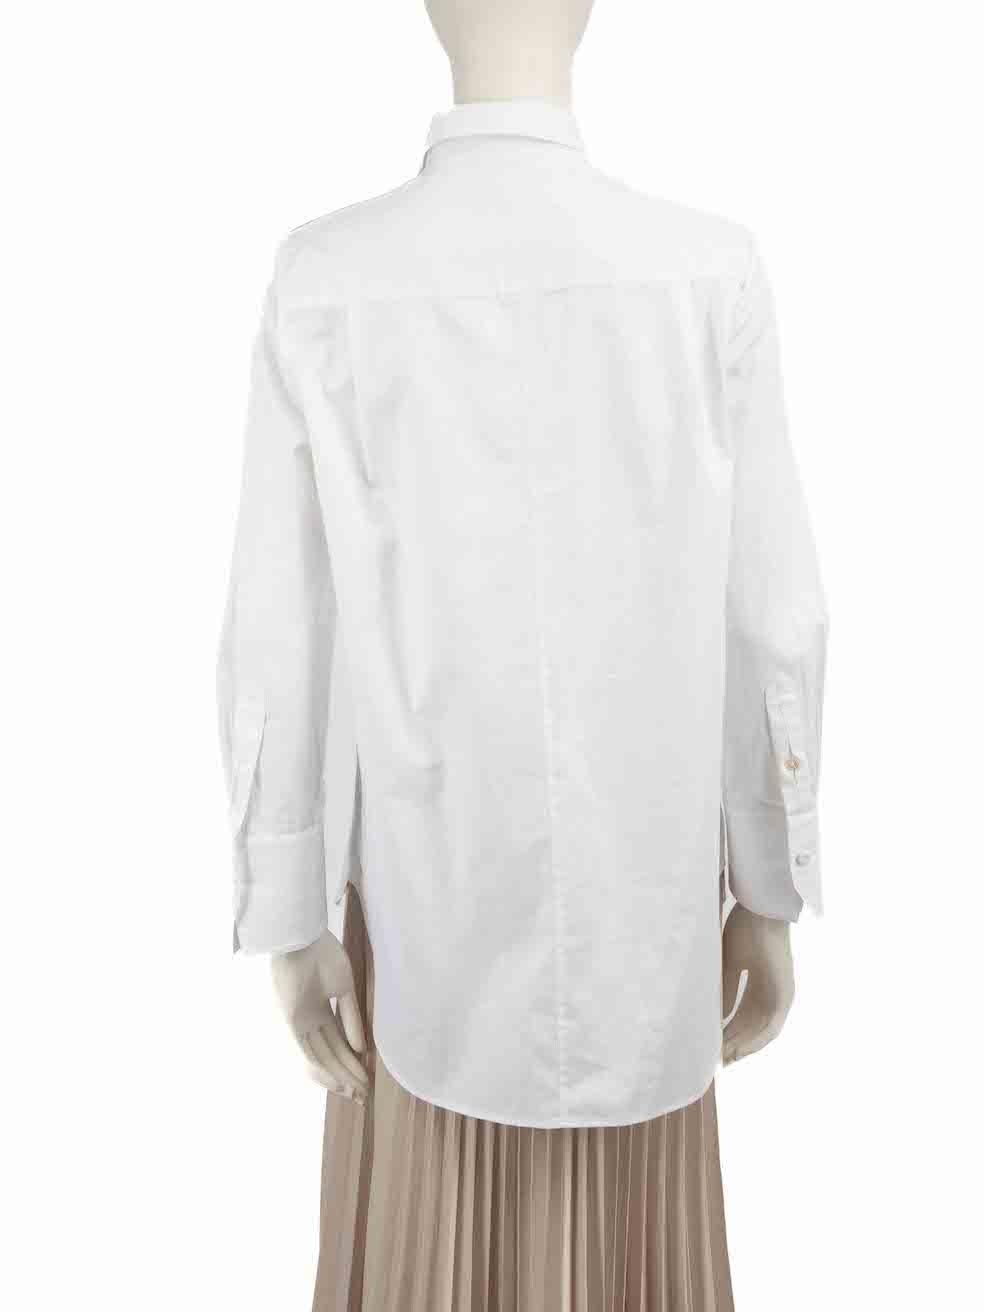 Adam Lippes White Crystal Embellished Shirt Size L In New Condition For Sale In London, GB